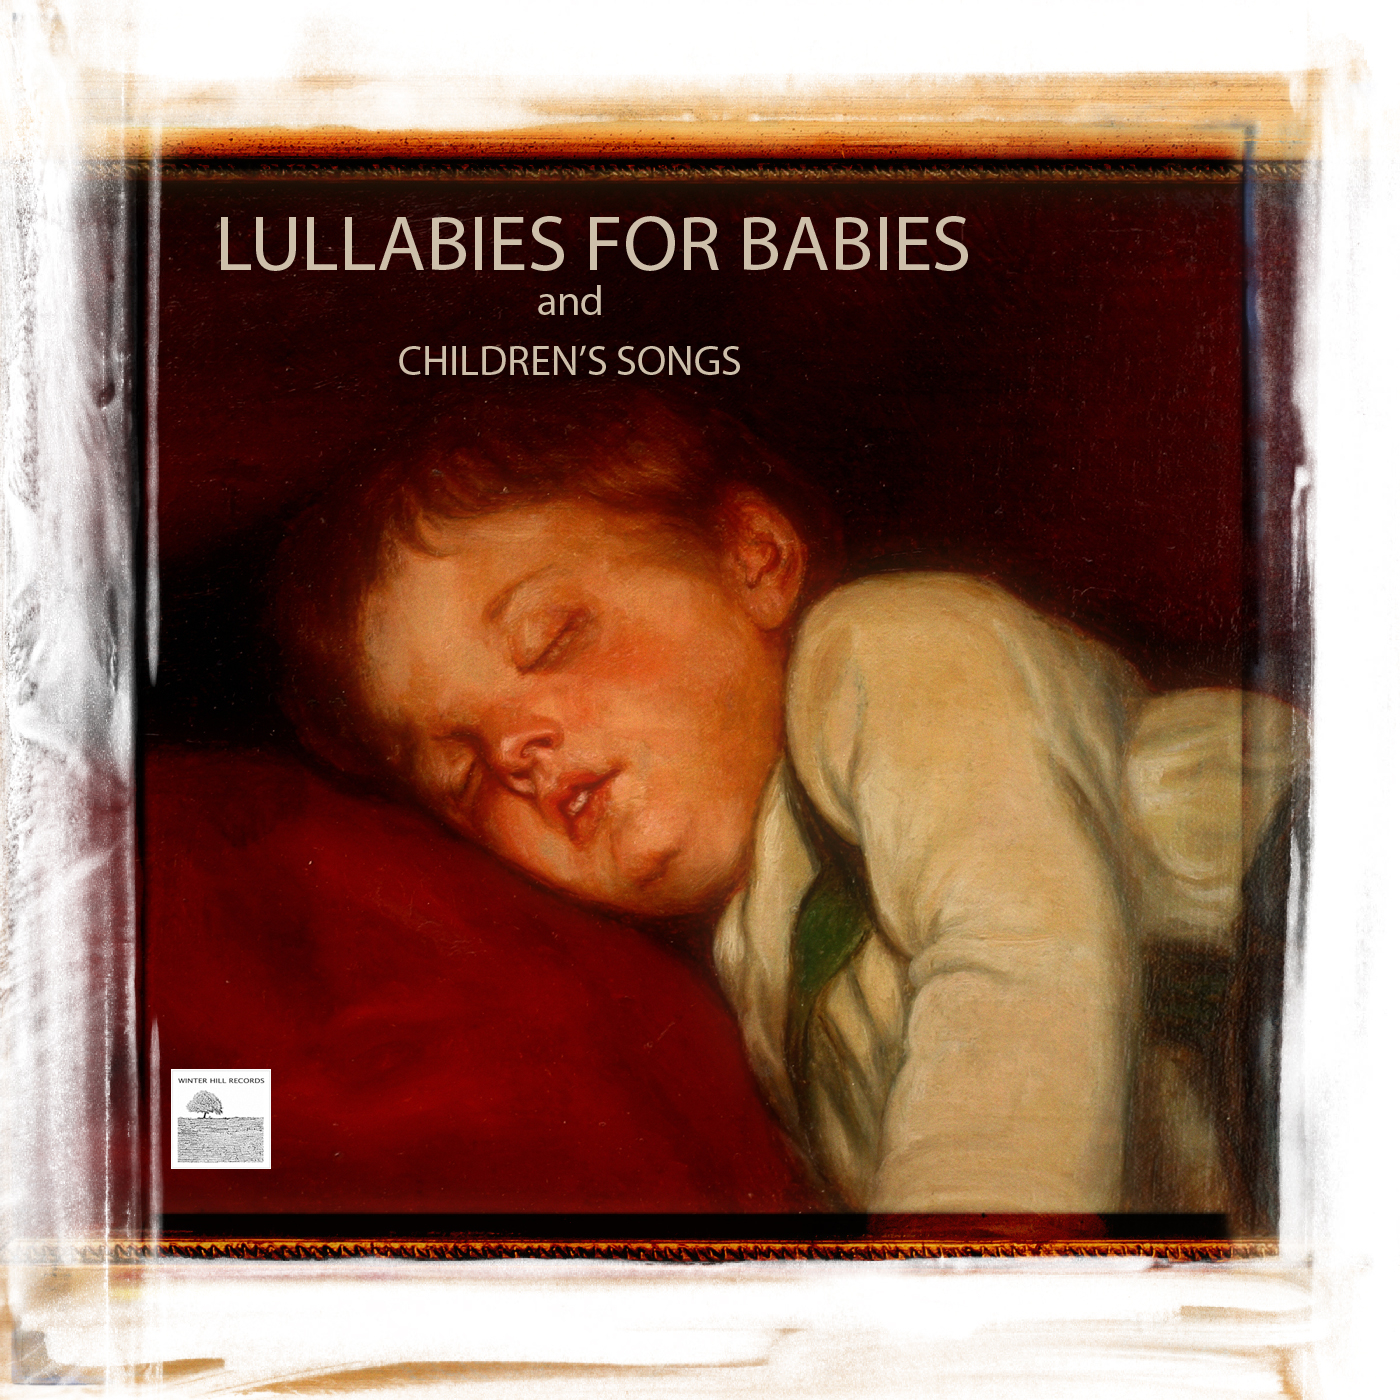 Lullabies for Babies and Children Songs - 30 Lullabies and Songs for babies,Nursery Rhymes and Music for Children